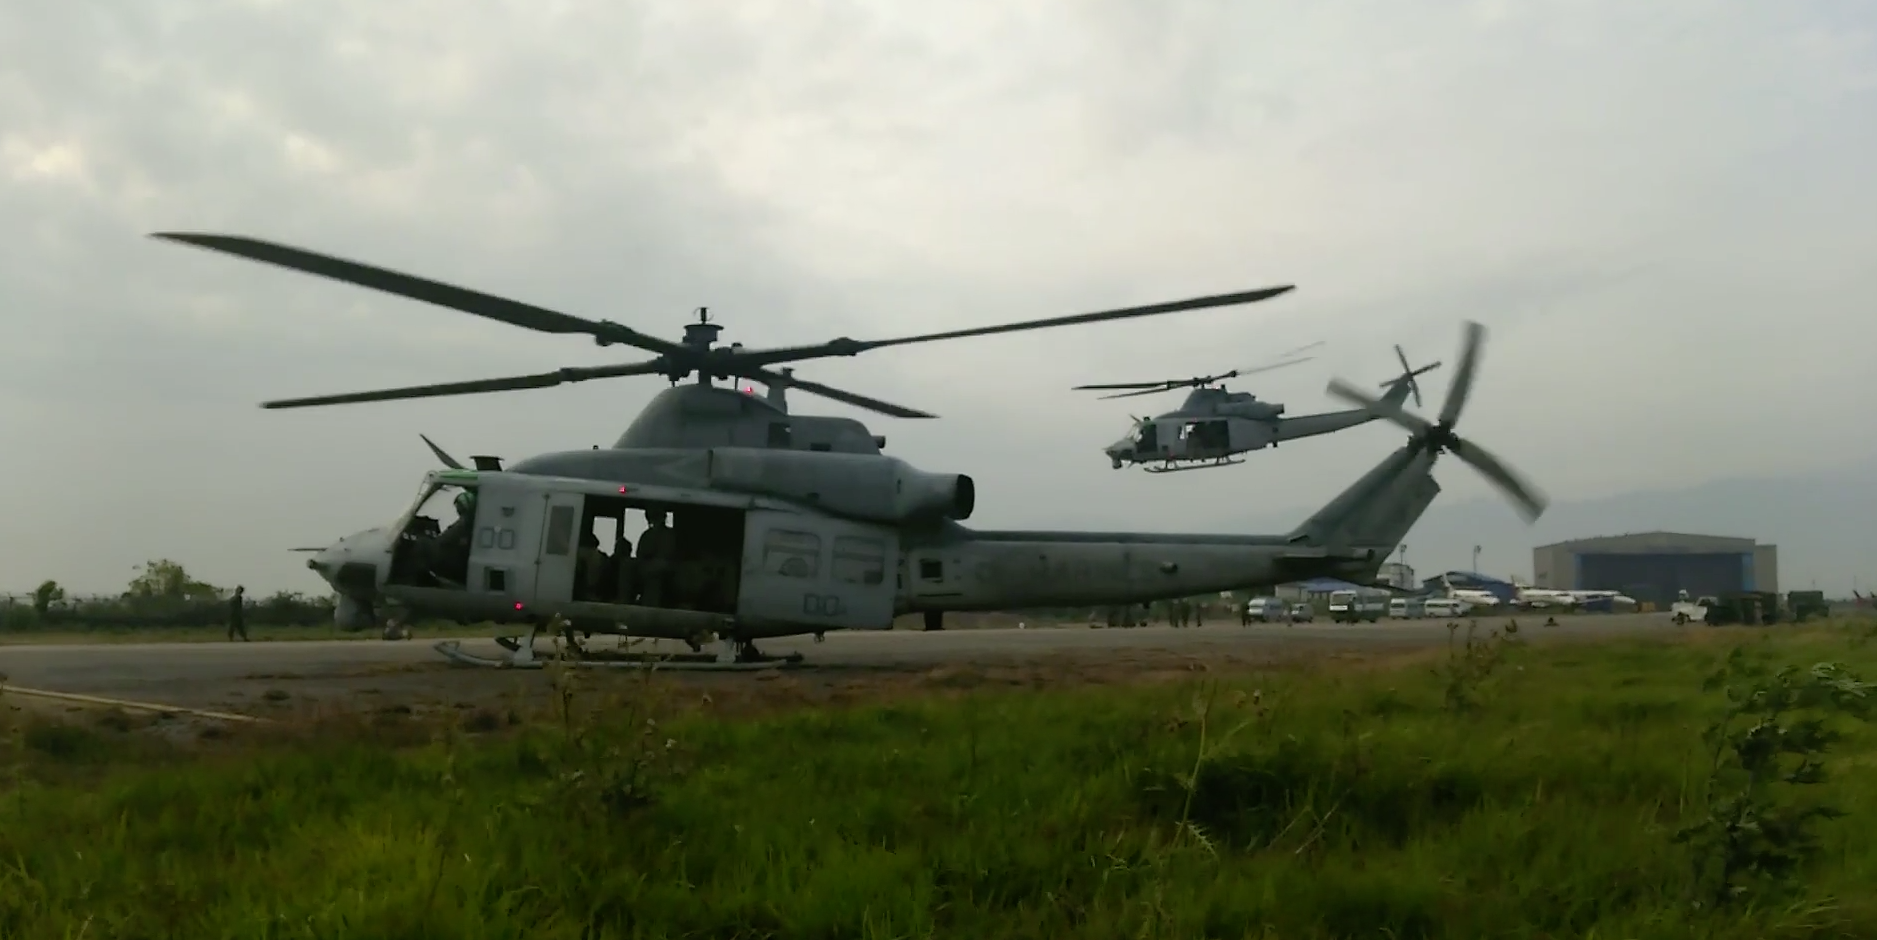 Two UH-1Y helicopters with Marine Light Attack Helicopter Squadron (HMLA) 469, take off from the Tribhuvan International Airport in Kathmandu, Nepal, May 13, 2015. US Marine Corp Image